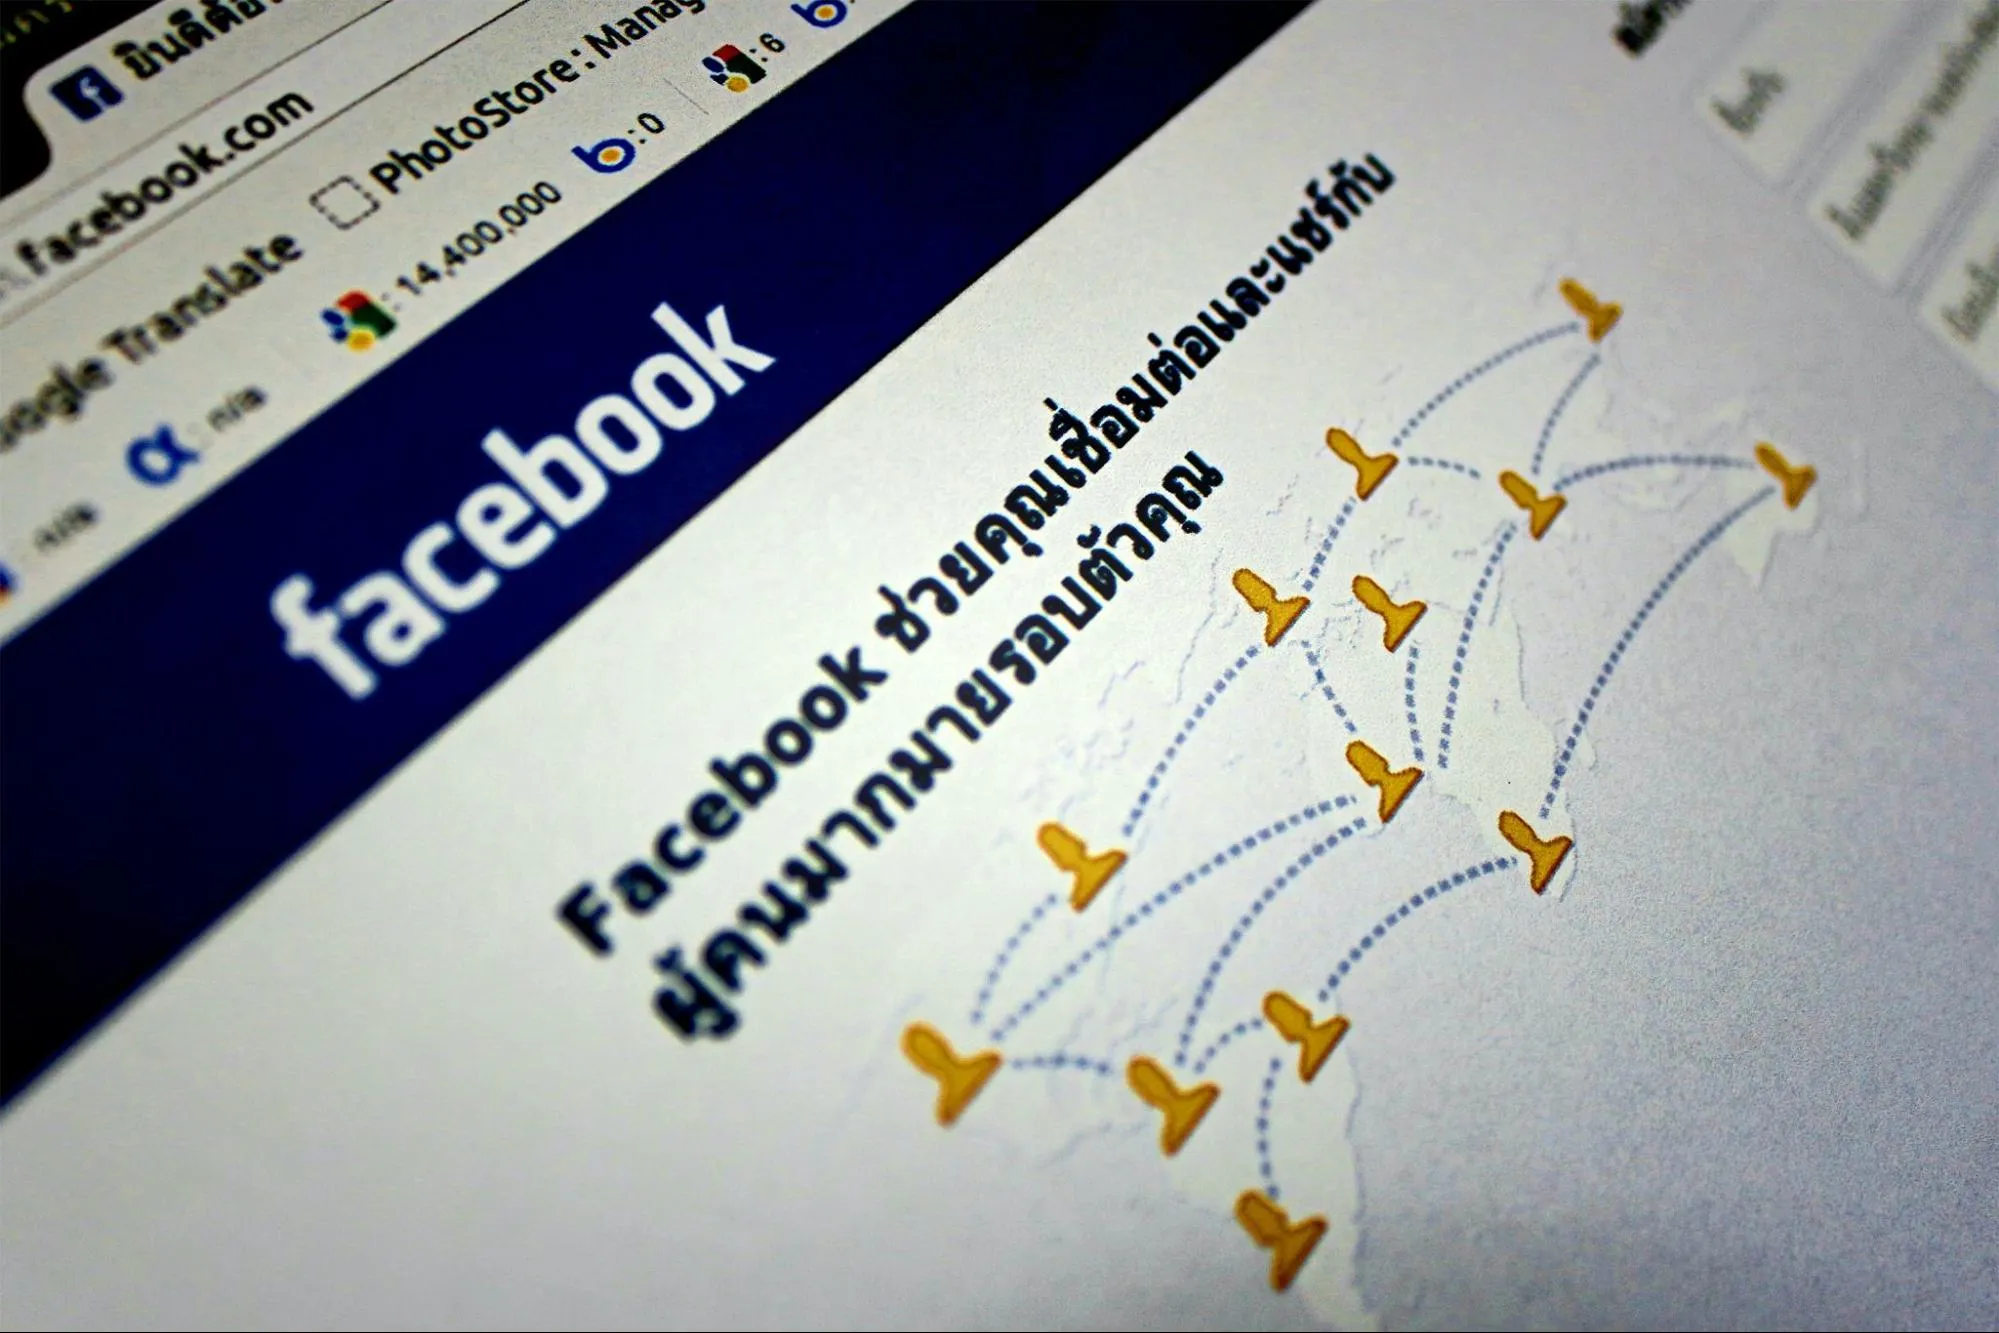 How Do I Target Business Owners on Facebook?